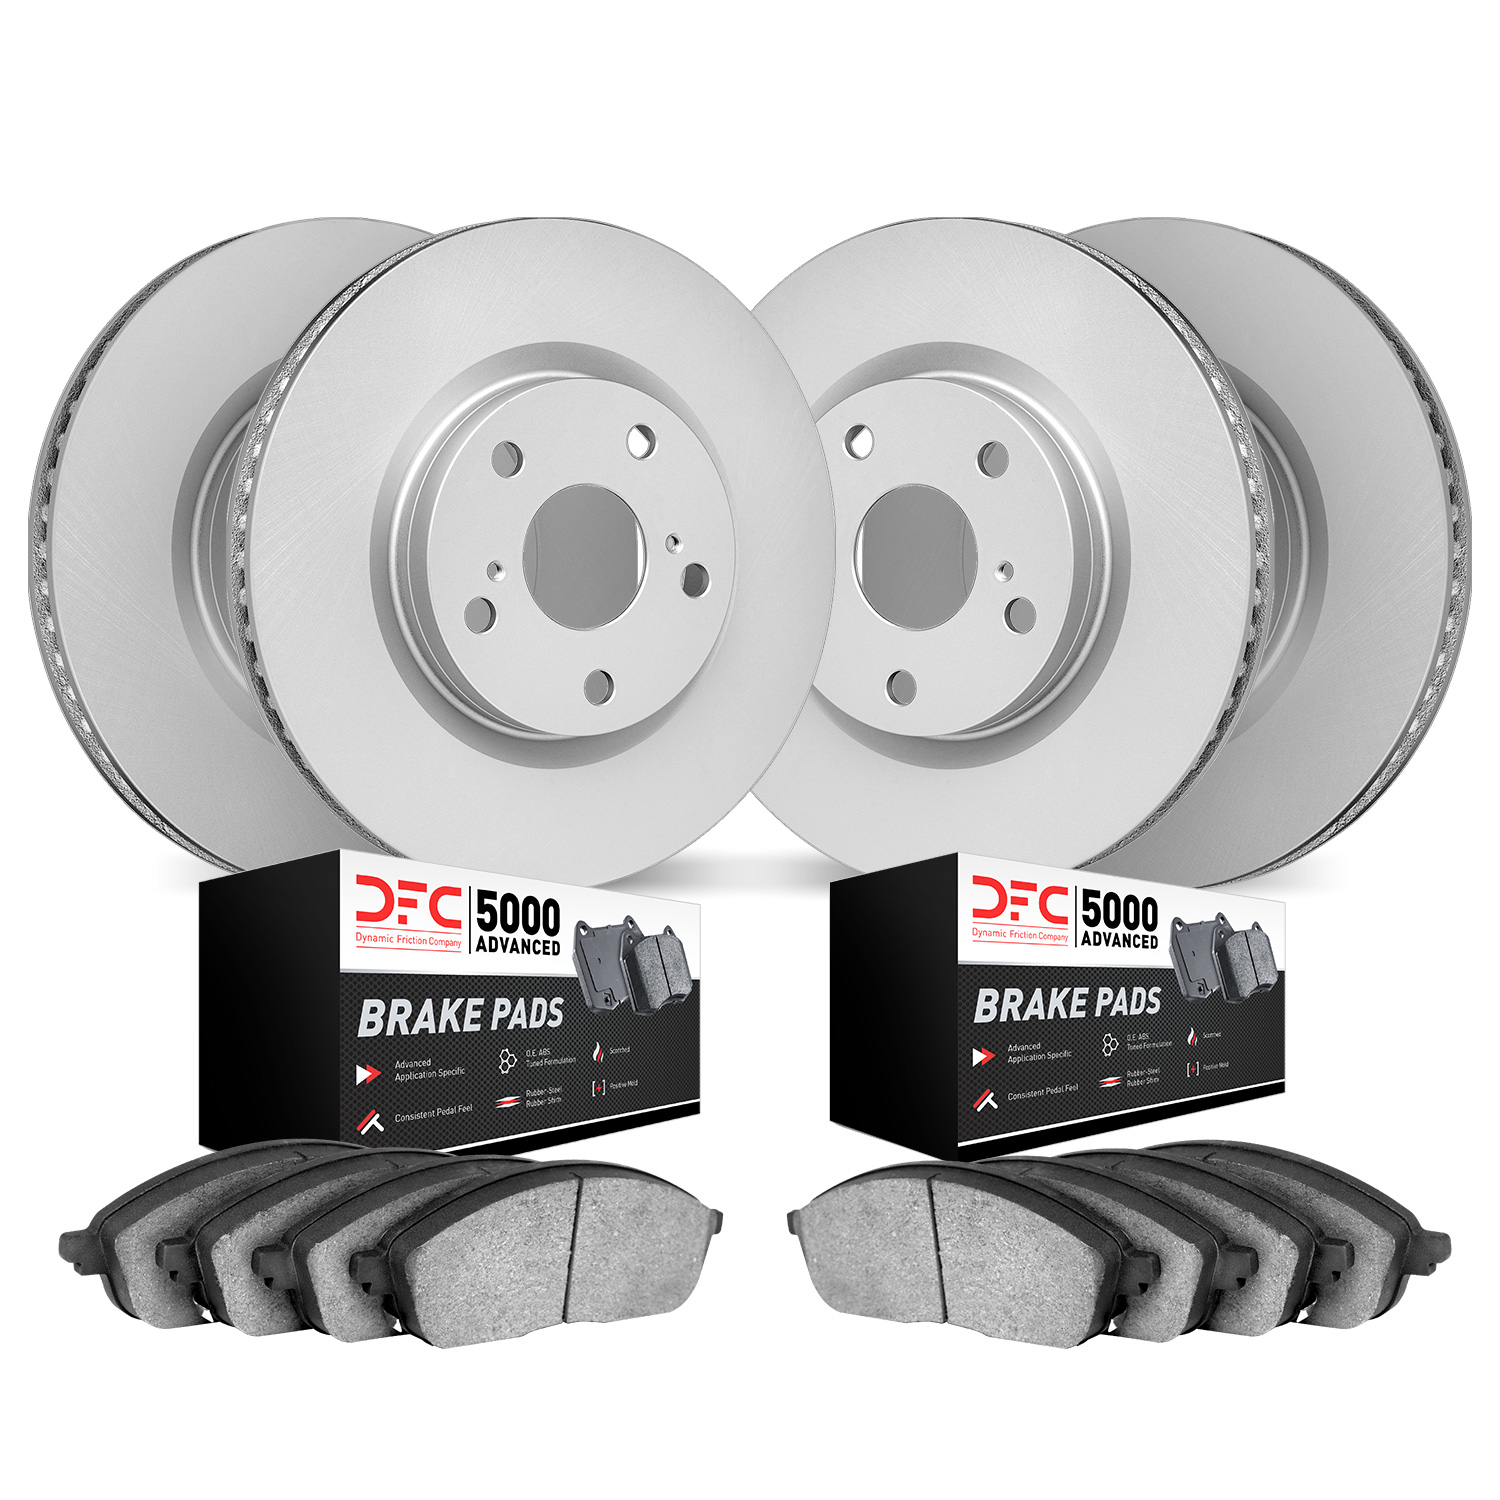 4504-67015 Geospec Brake Rotors w/5000 Advanced Brake Pads Kit, 2009-2016 Renault, Position: Front and Rear